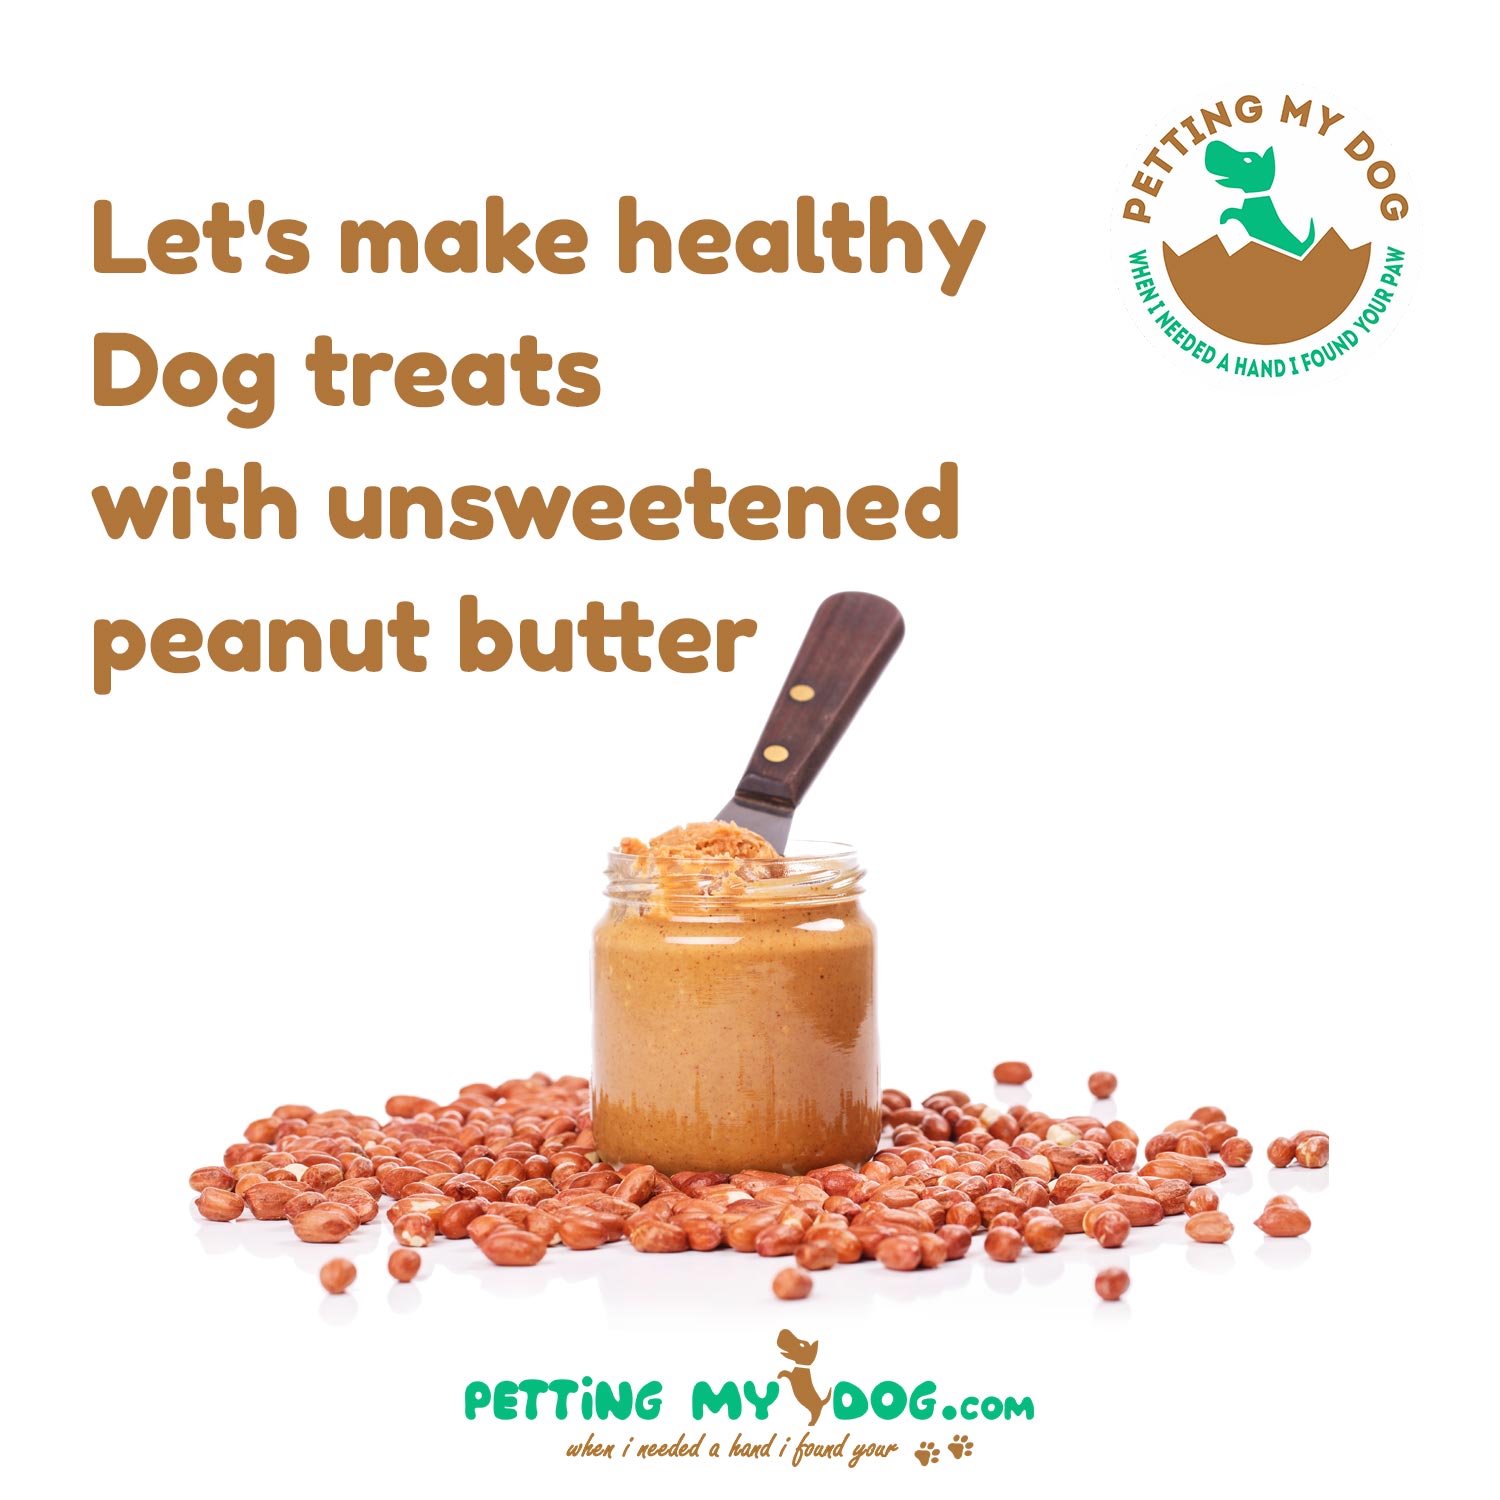 6 healthy Dog treats with unsweetened peanut butter